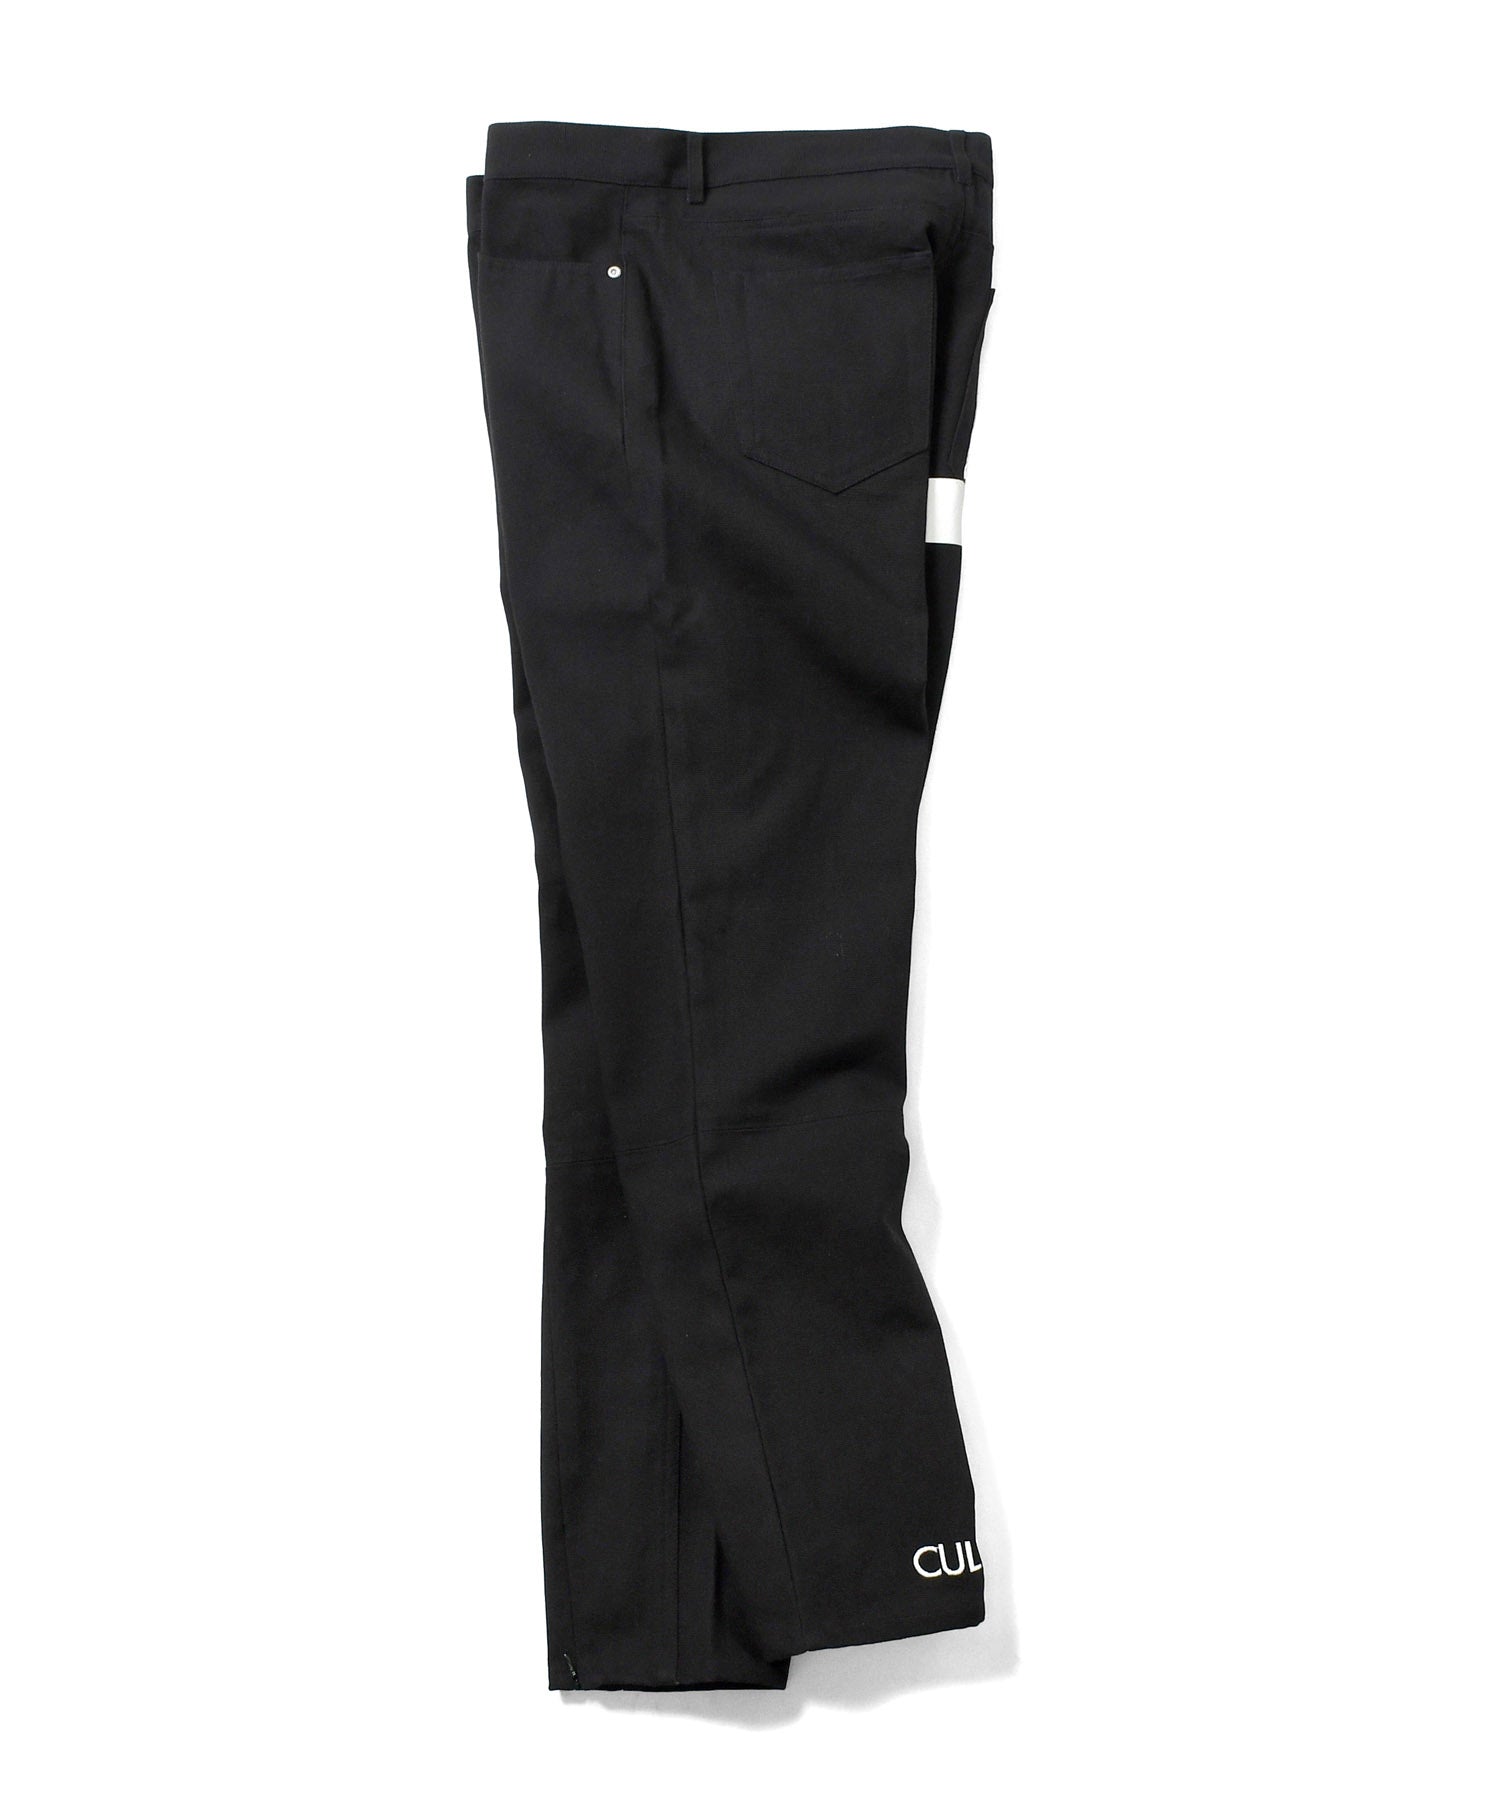 Wanna "CULT TRUE" Front Flared Pants